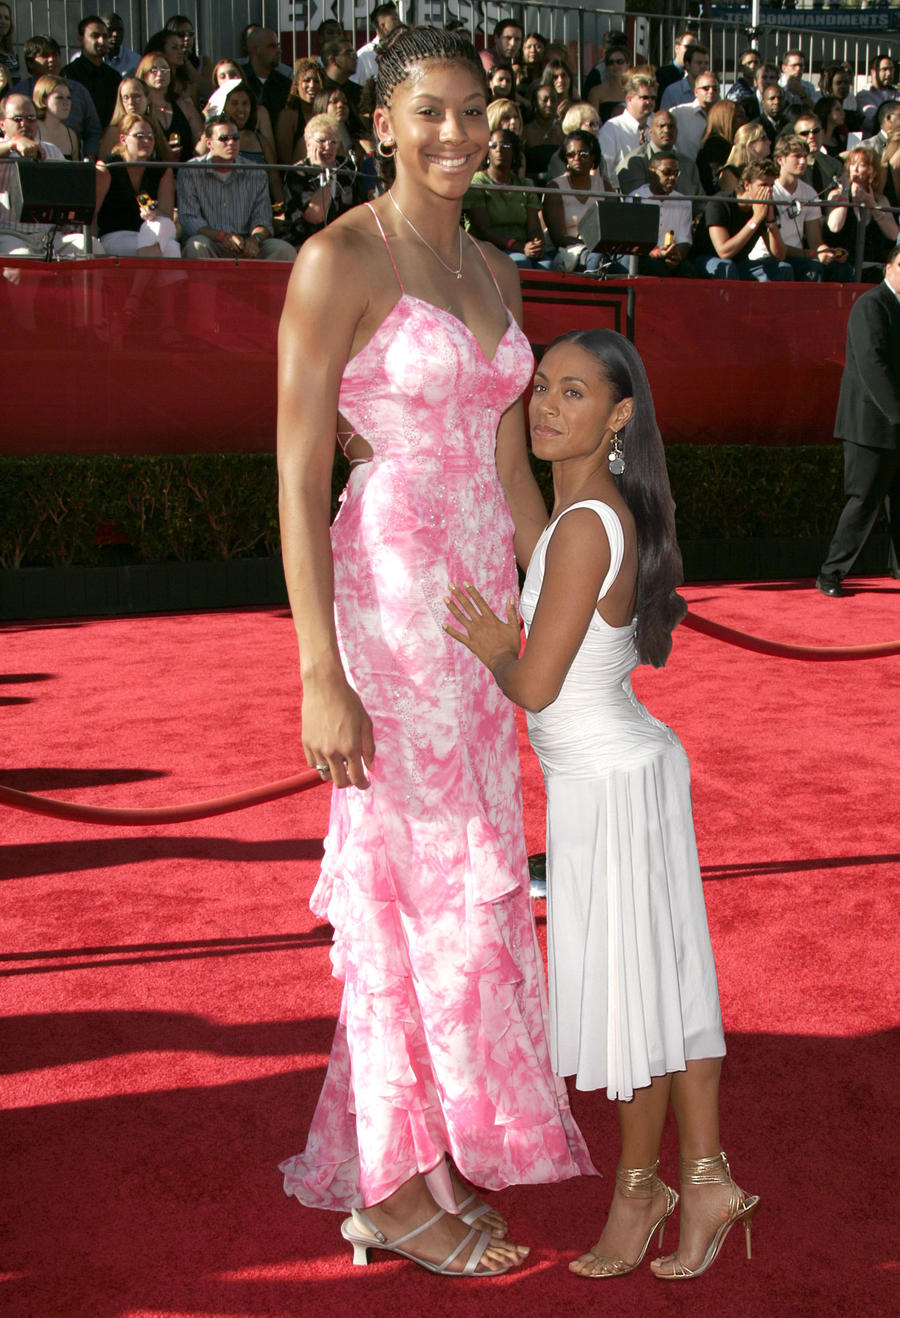 candace_parker_and_jada_pinkett_by_lowerrider-d5c8uvh.jpg